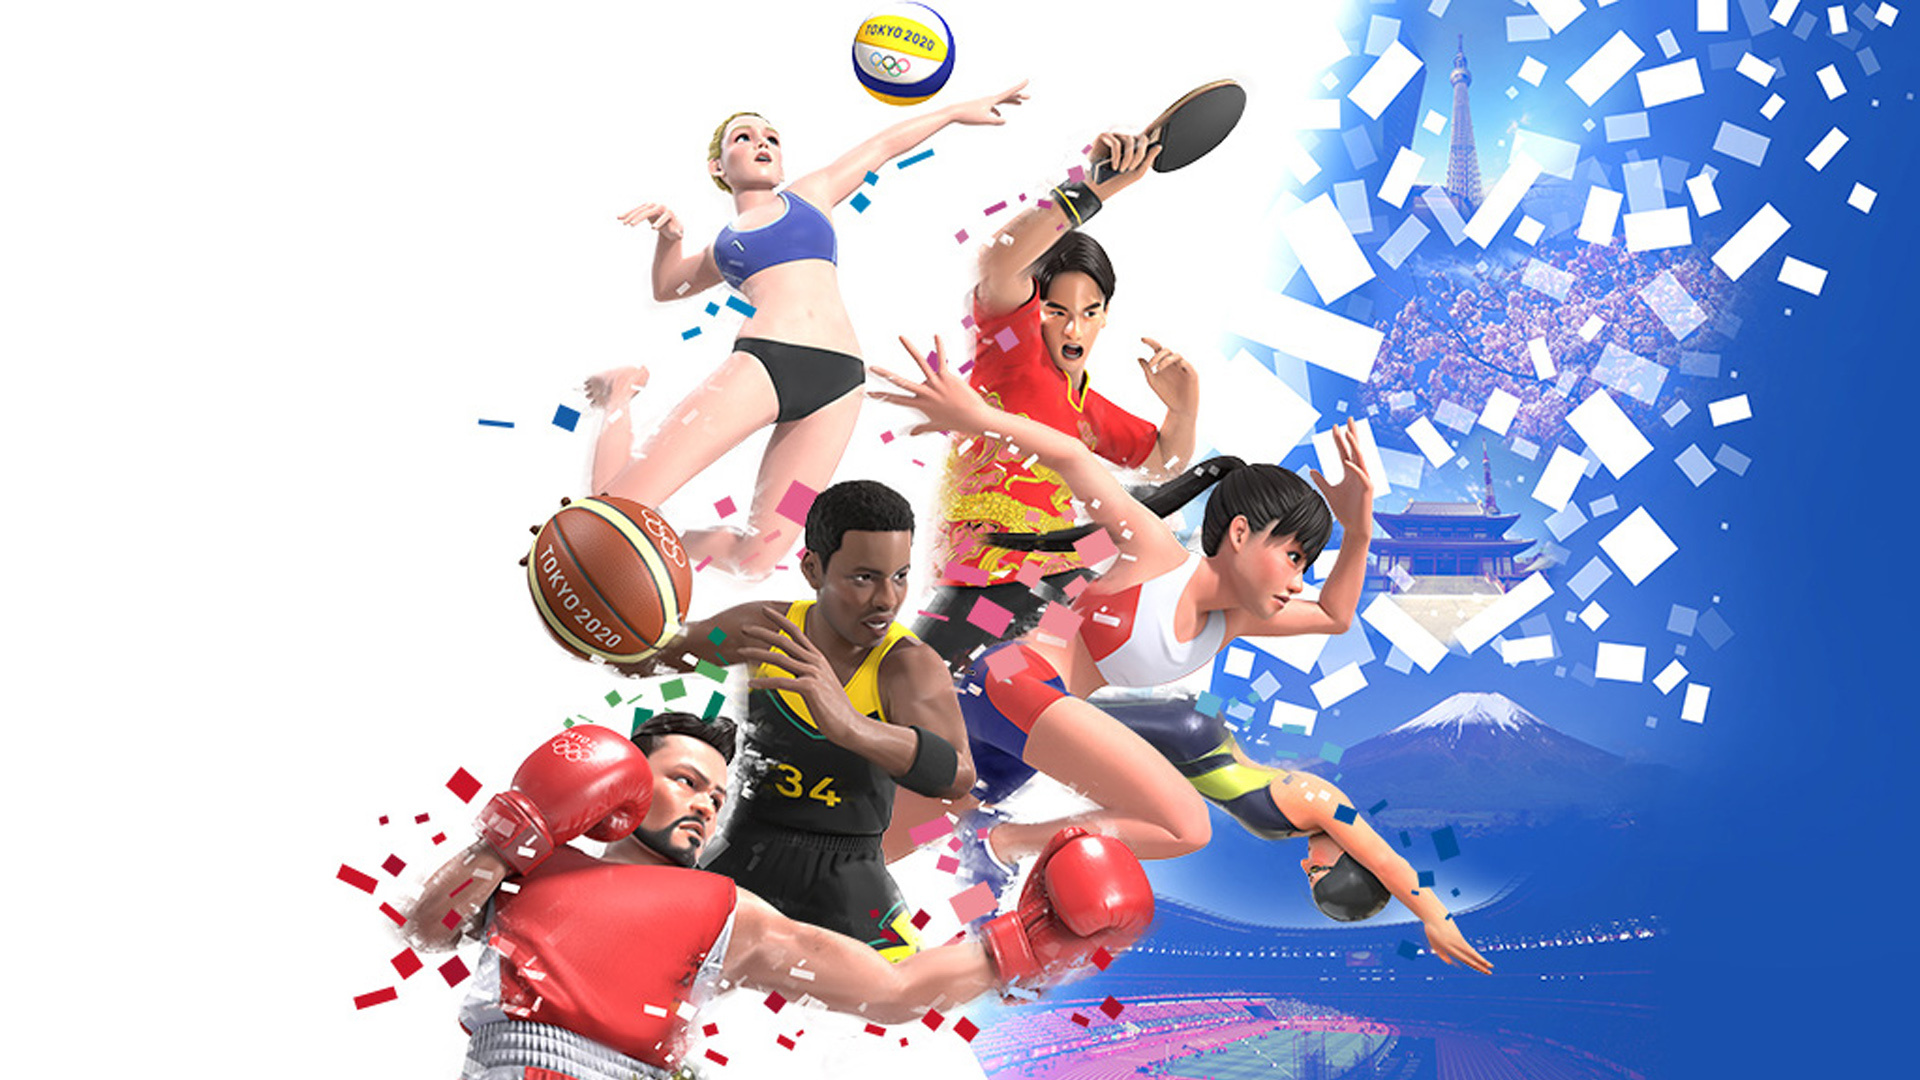 Could Sega S Superb Tokyo Olympics Game Come To Ps5 After Postponement Push Square